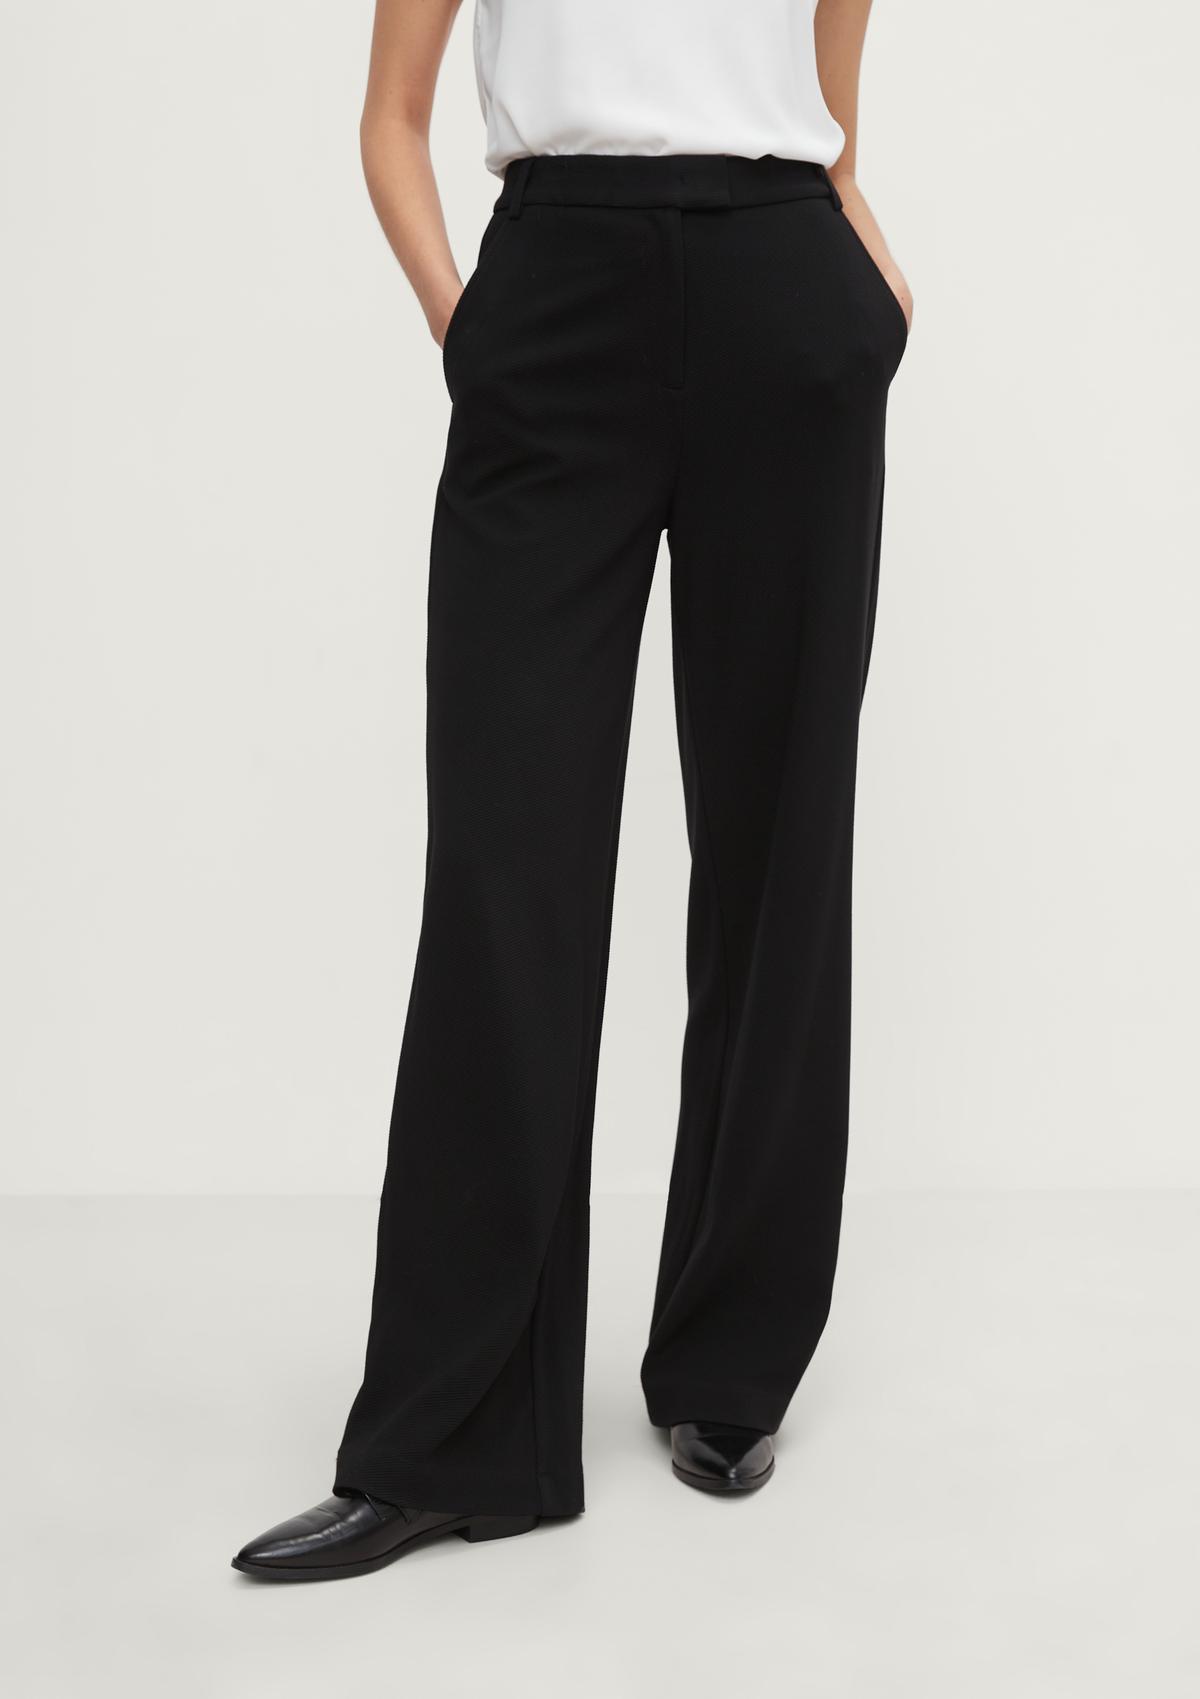 Regular: trousers with a wide leg